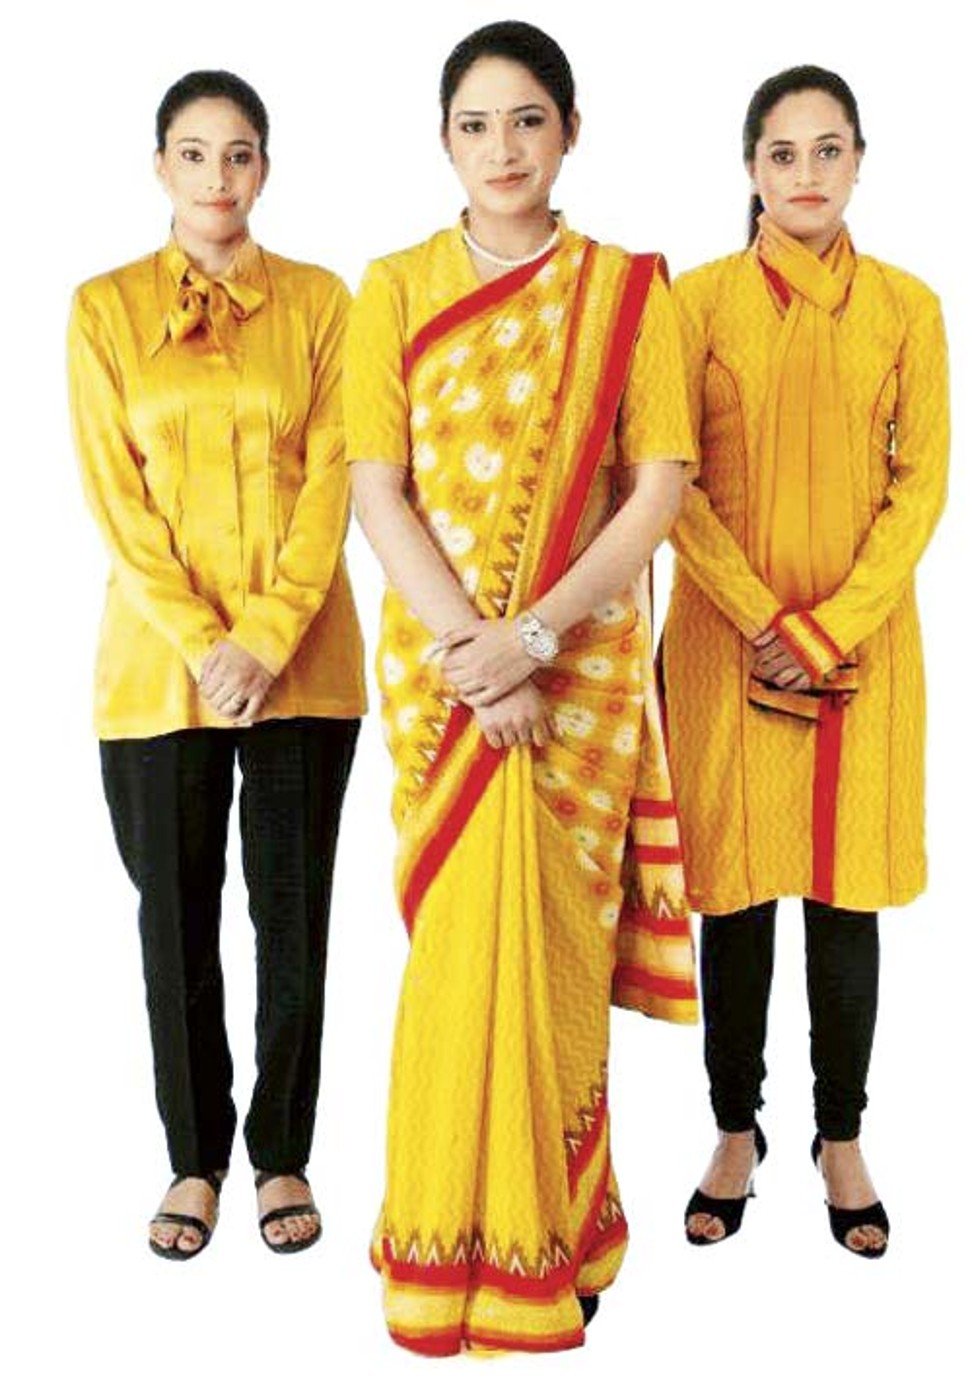 The uniform choice available to female Air India flight attendants. 